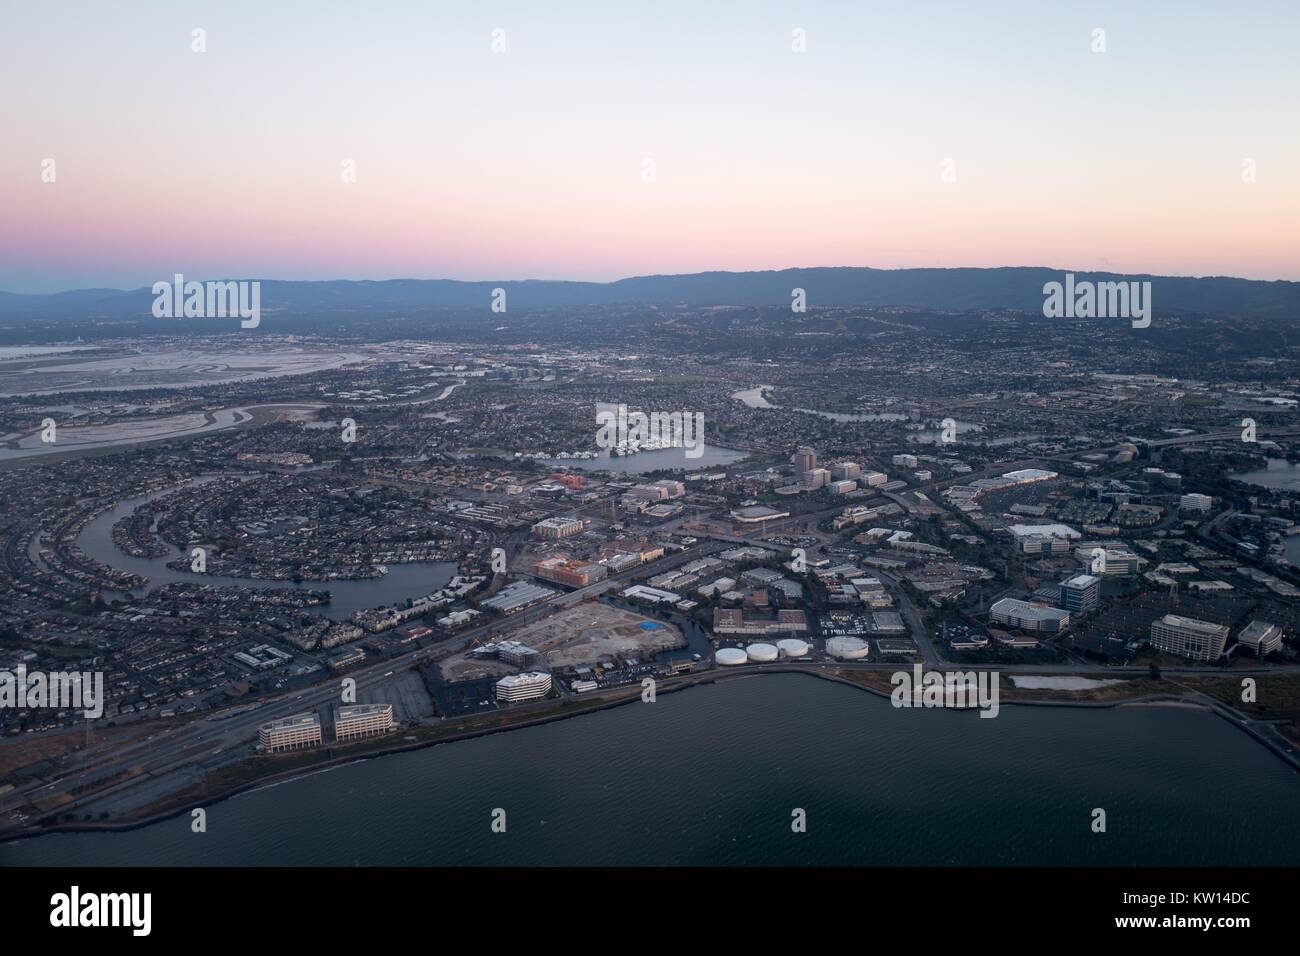 Aerial view of Silicon Valley at dusk, with a portion of the San Mateo/Hayward Bridge visible, as well as Foster City, including the California headquarters of Gilead Sciences, Visa, and Conversica, California, July, 2016. Stock Photo